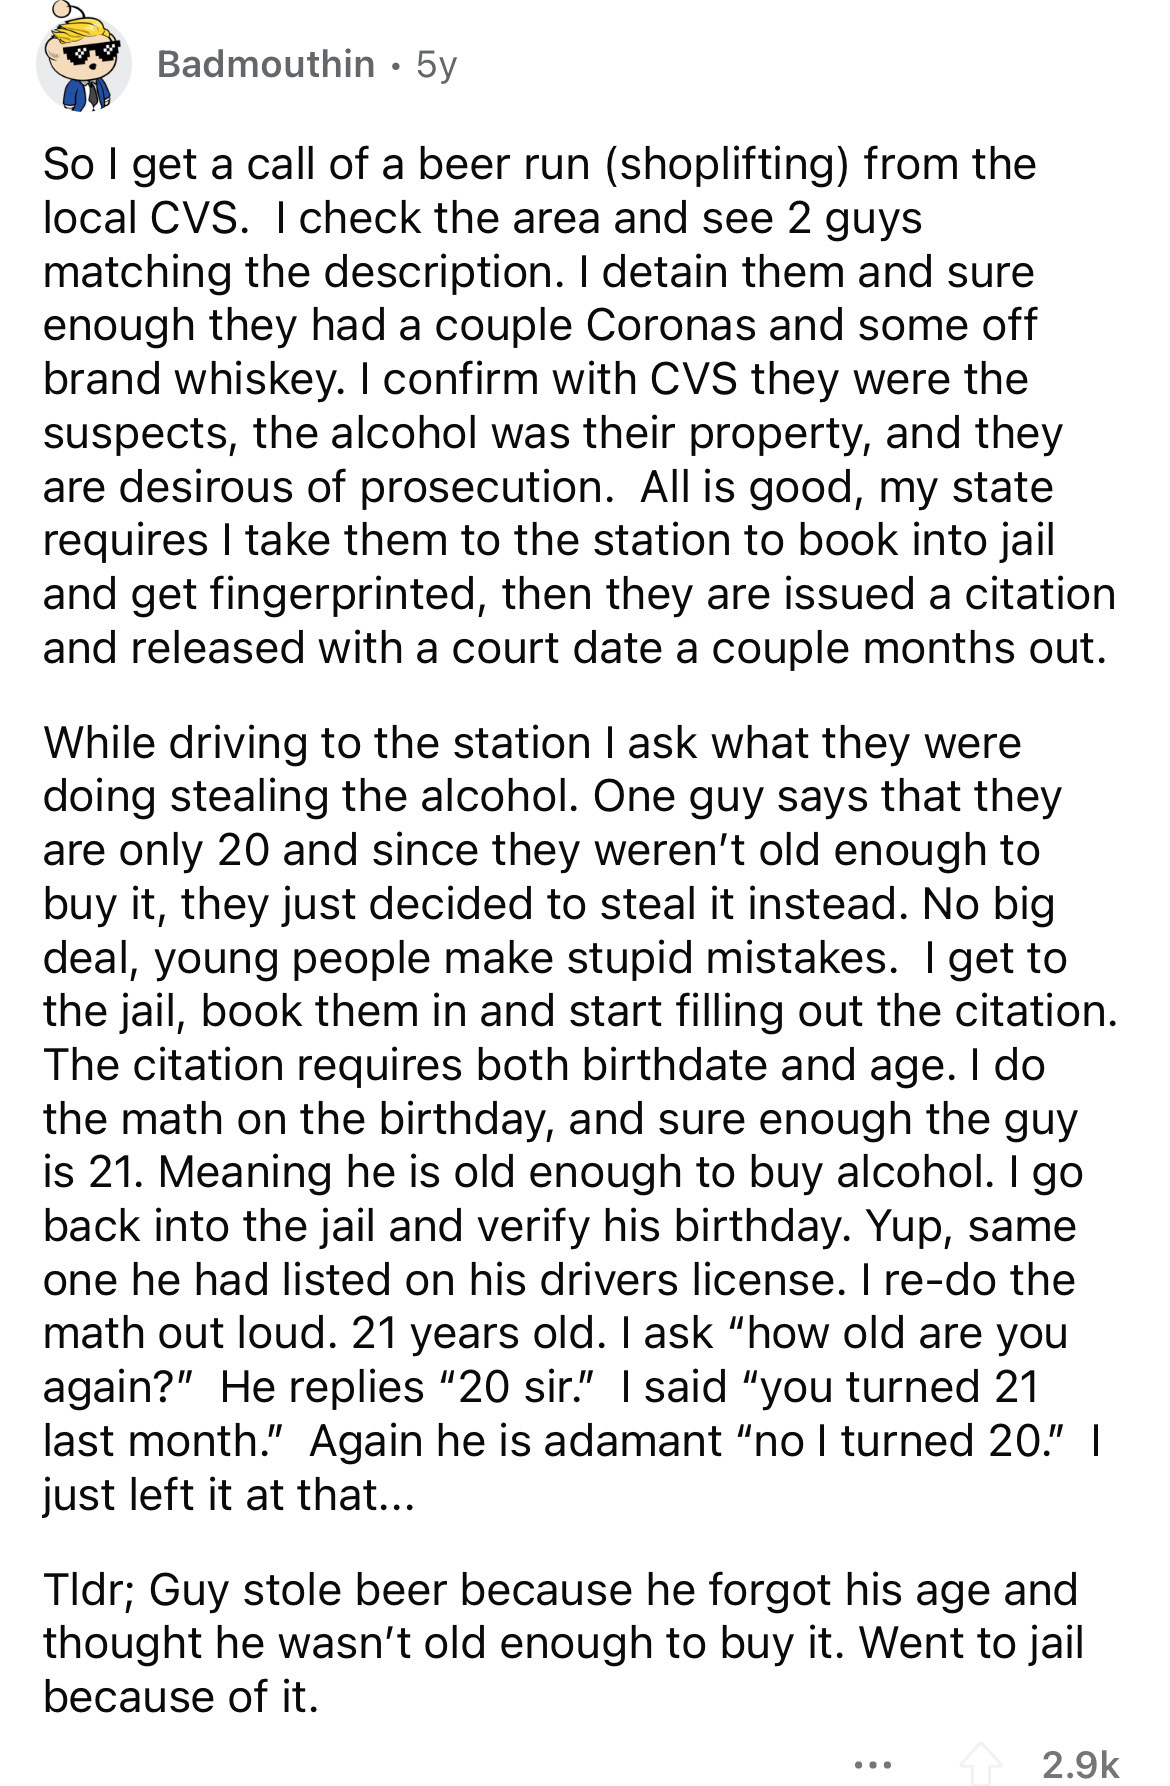 document - Badmouthin. 5y So I get a call of a beer run shoplifting from the local Cvs. I check the area and see 2 guys matching the description. I detain them and sure enough they had a couple Coronas and some off brand whiskey. I confirm with Cvs they w